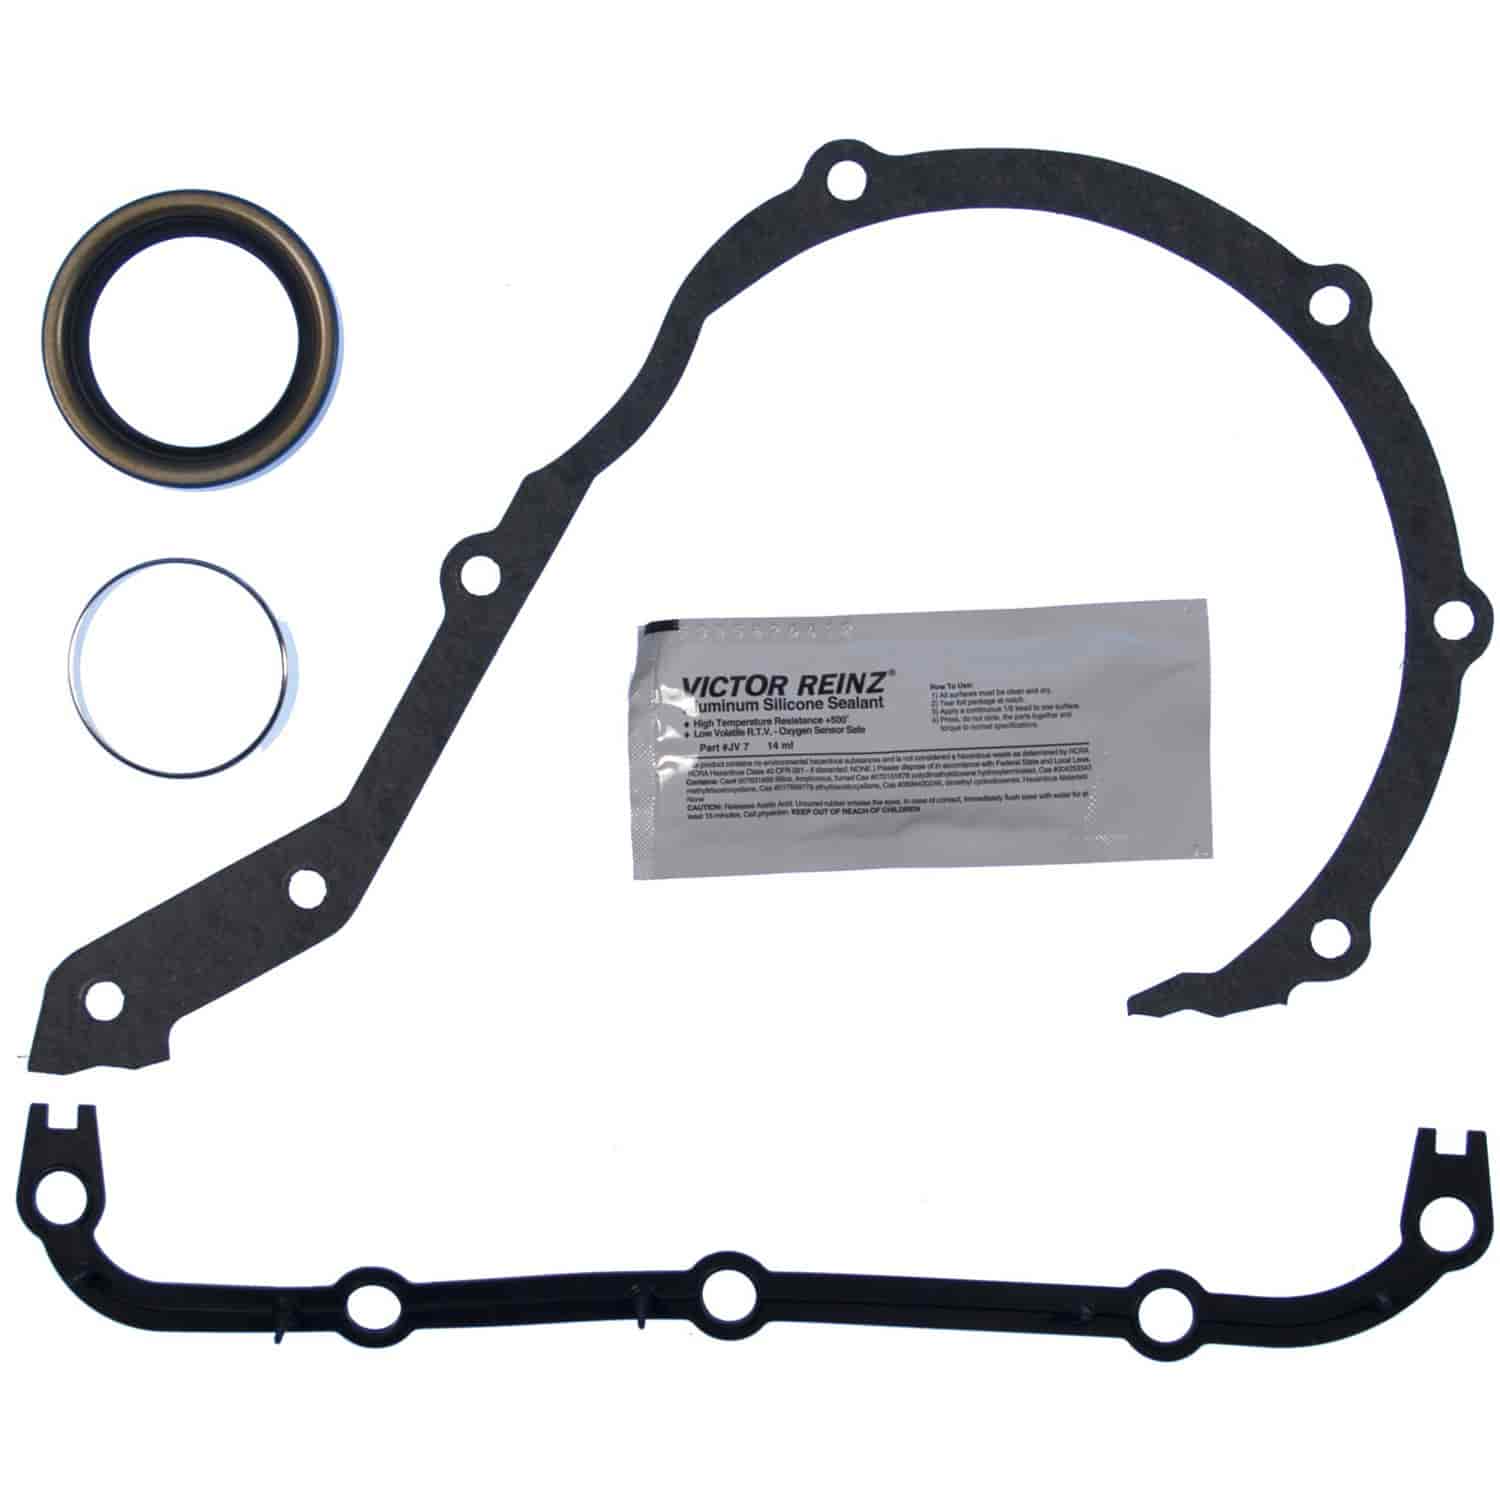 Clevite MAHLE Timing Cover Set Ford-Pass Trku0026Ind 240 300 65-94 Contains  Repair Sleeve Option To JV867